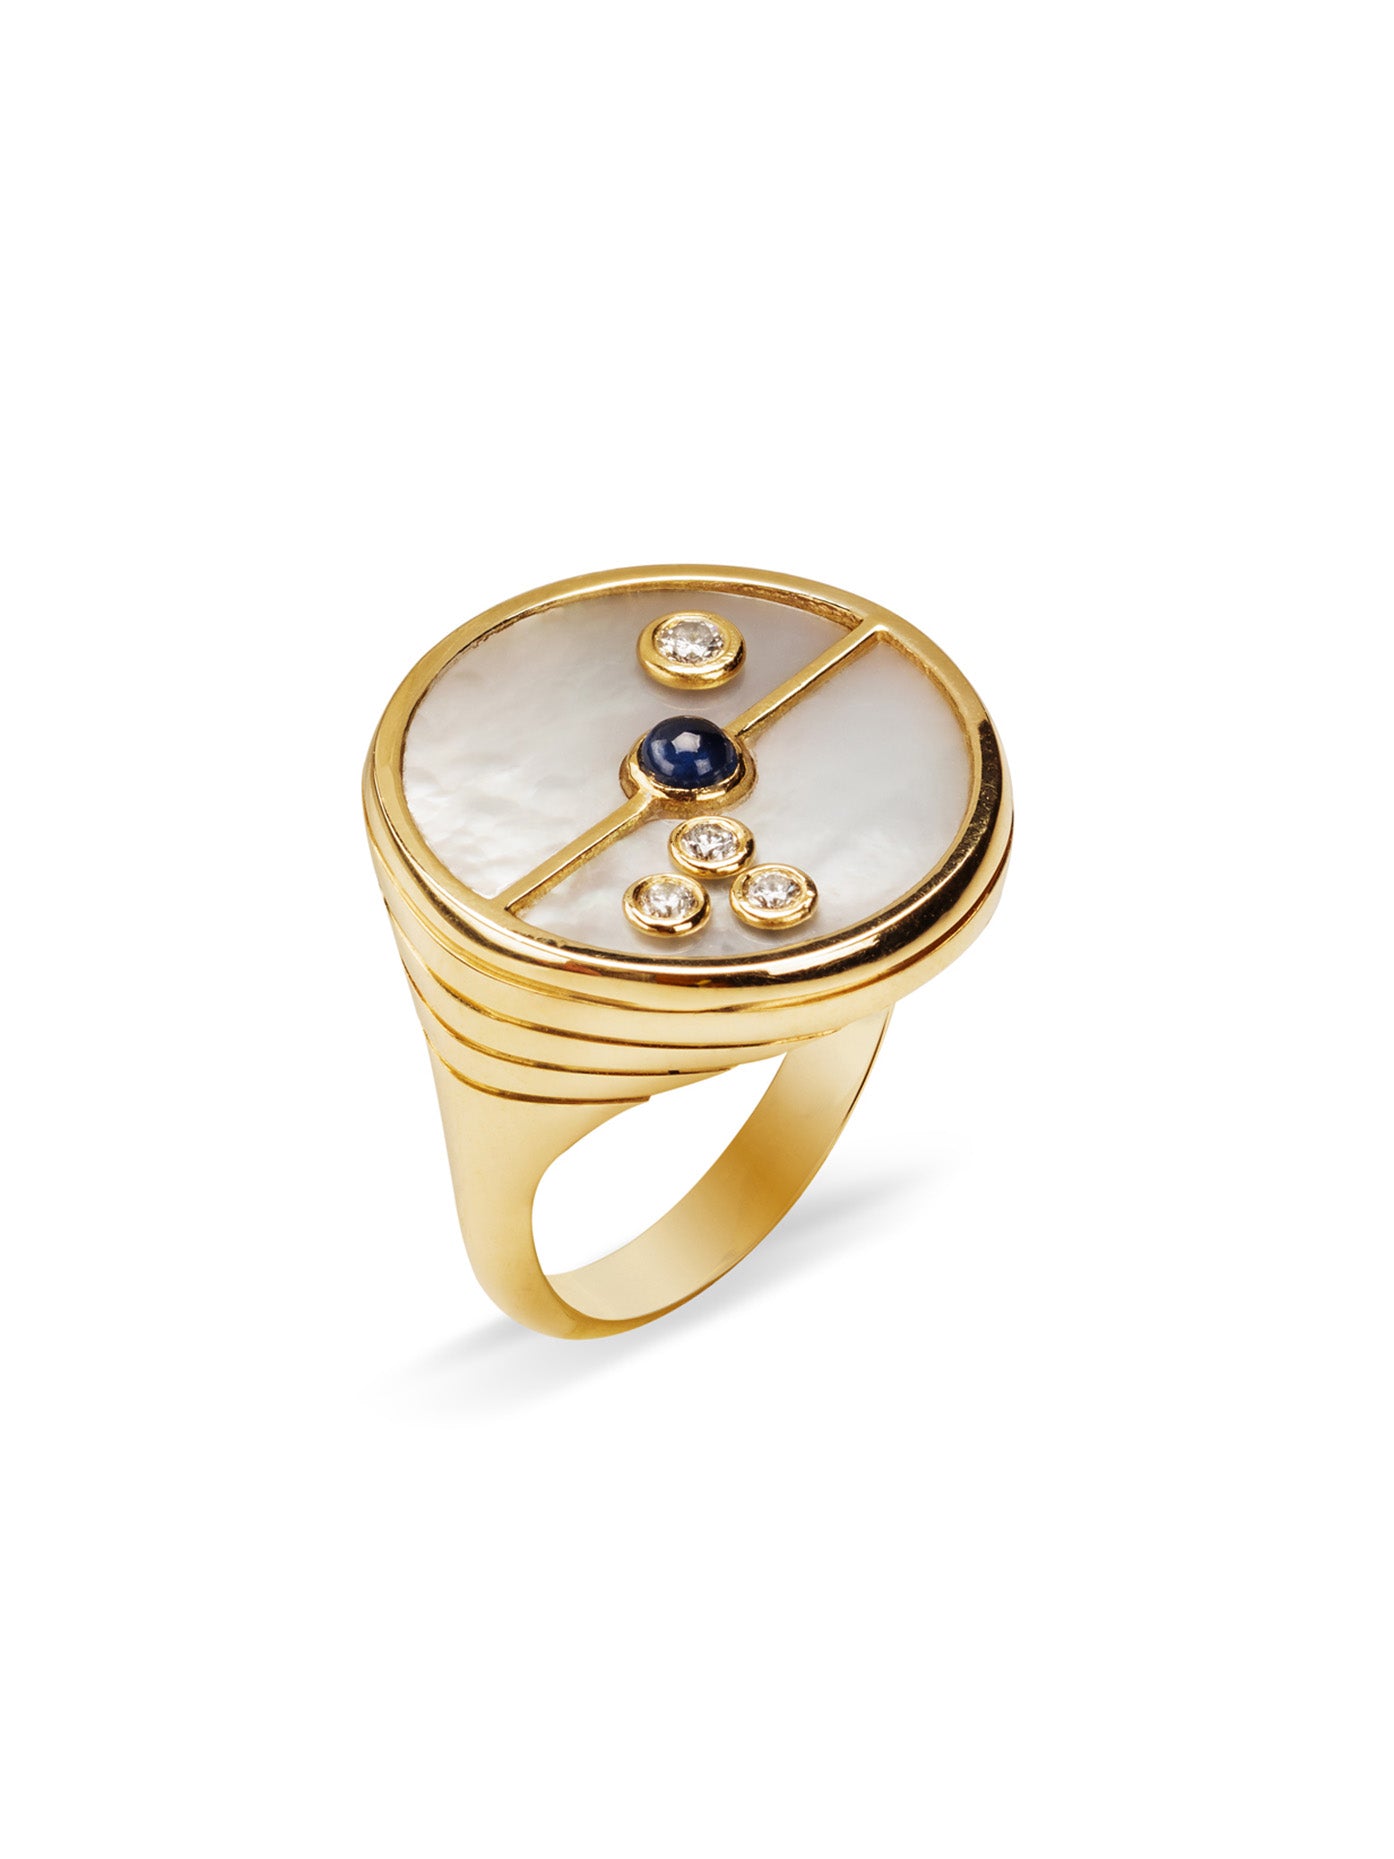 Photos - Ring Mother of Pearl and Blue Sapphire Compass Yellow Gold , 4 565005877264